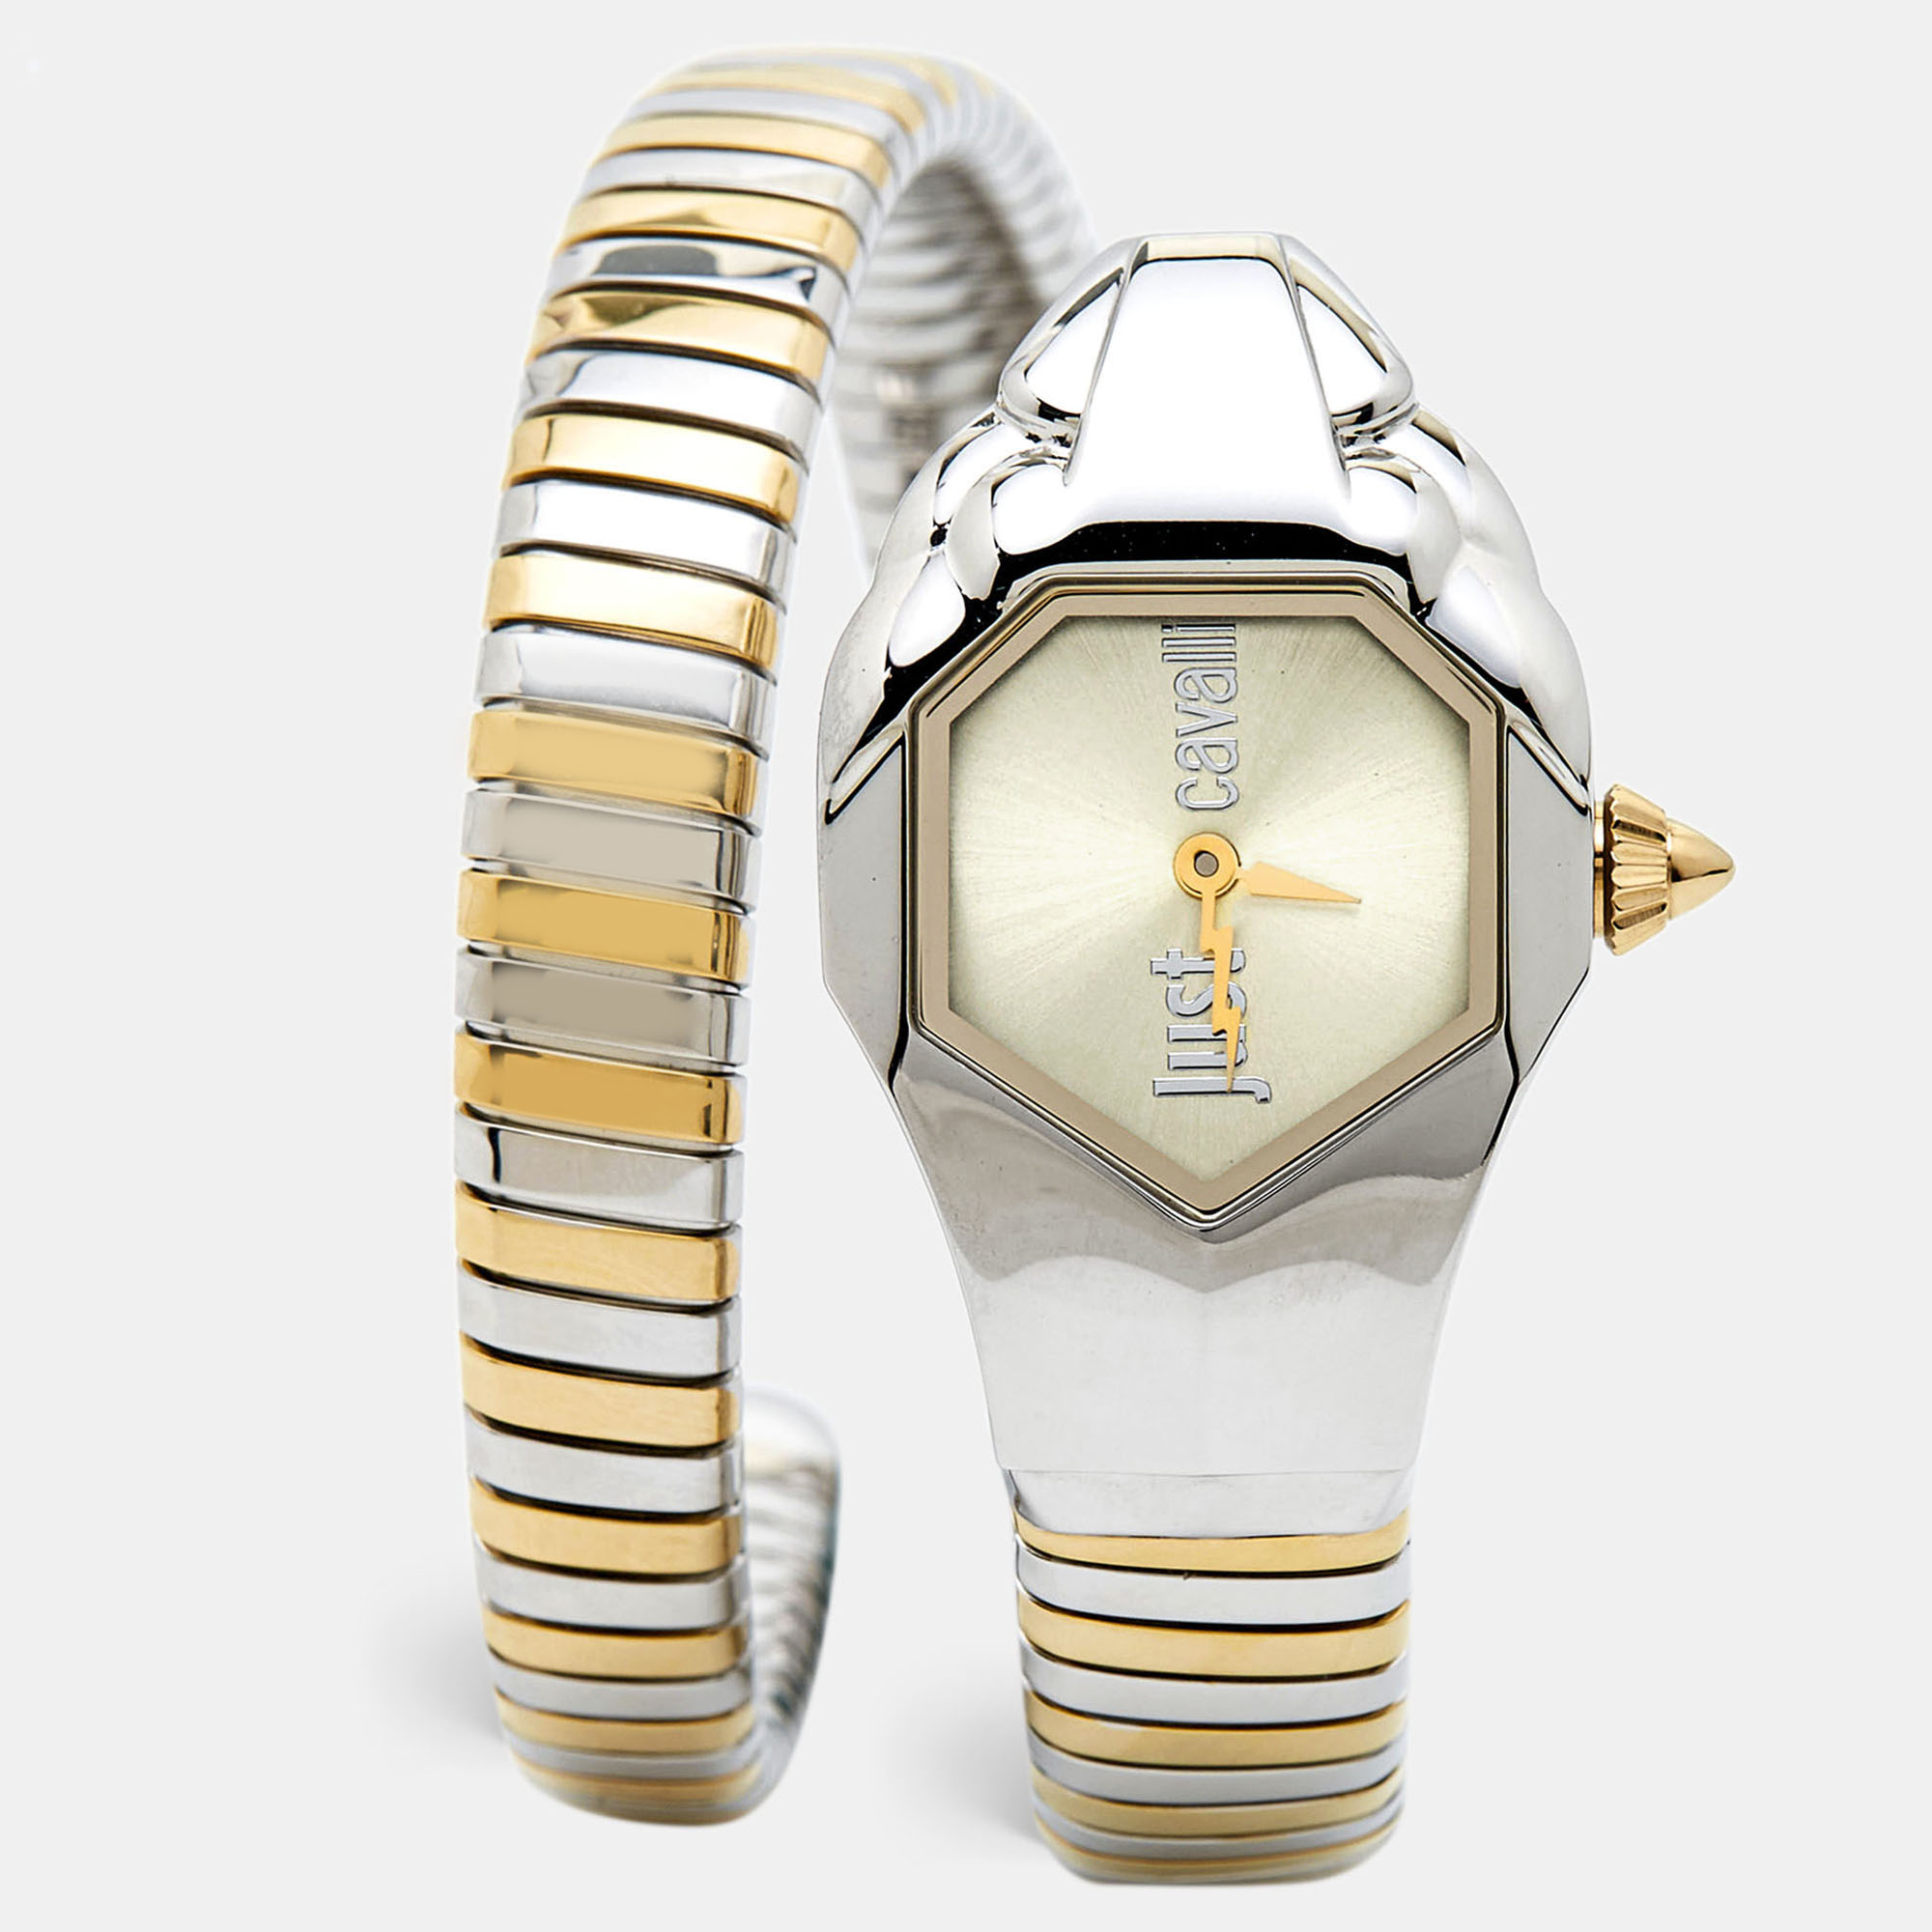 Just cavalli champagne two-tone stainless steel glam chic snake jc1l001m0035 women's wristwatch 22 mm